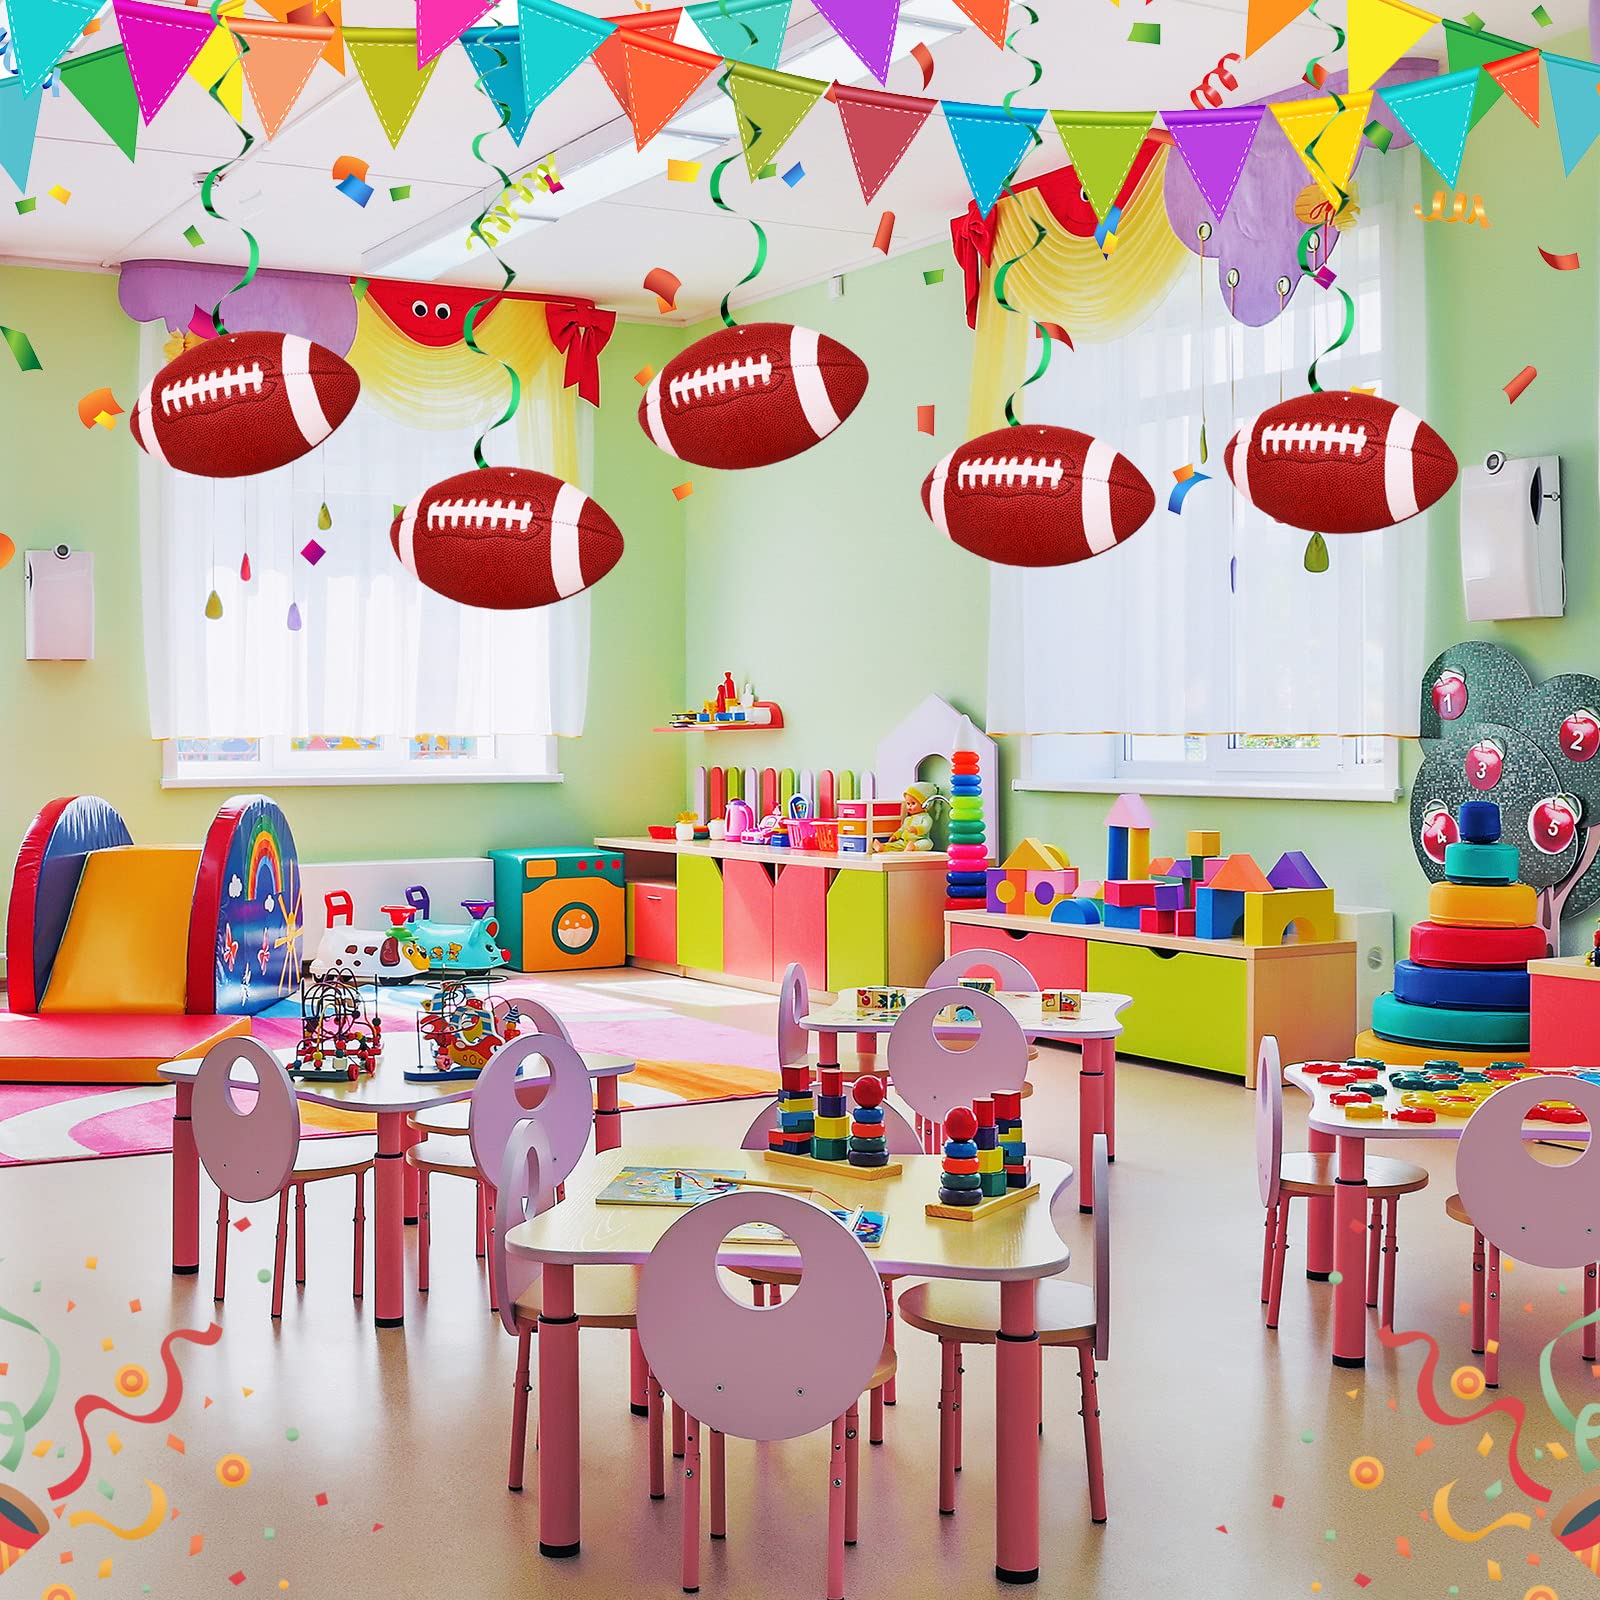 24 Pieces 7.9 Inch Football Party Decorations Football Hanging Swirls Football Party Supplies Sports Whirls for Football Bowl Game Day Football Fans Club Birthday Themed Home Decorations(Football)